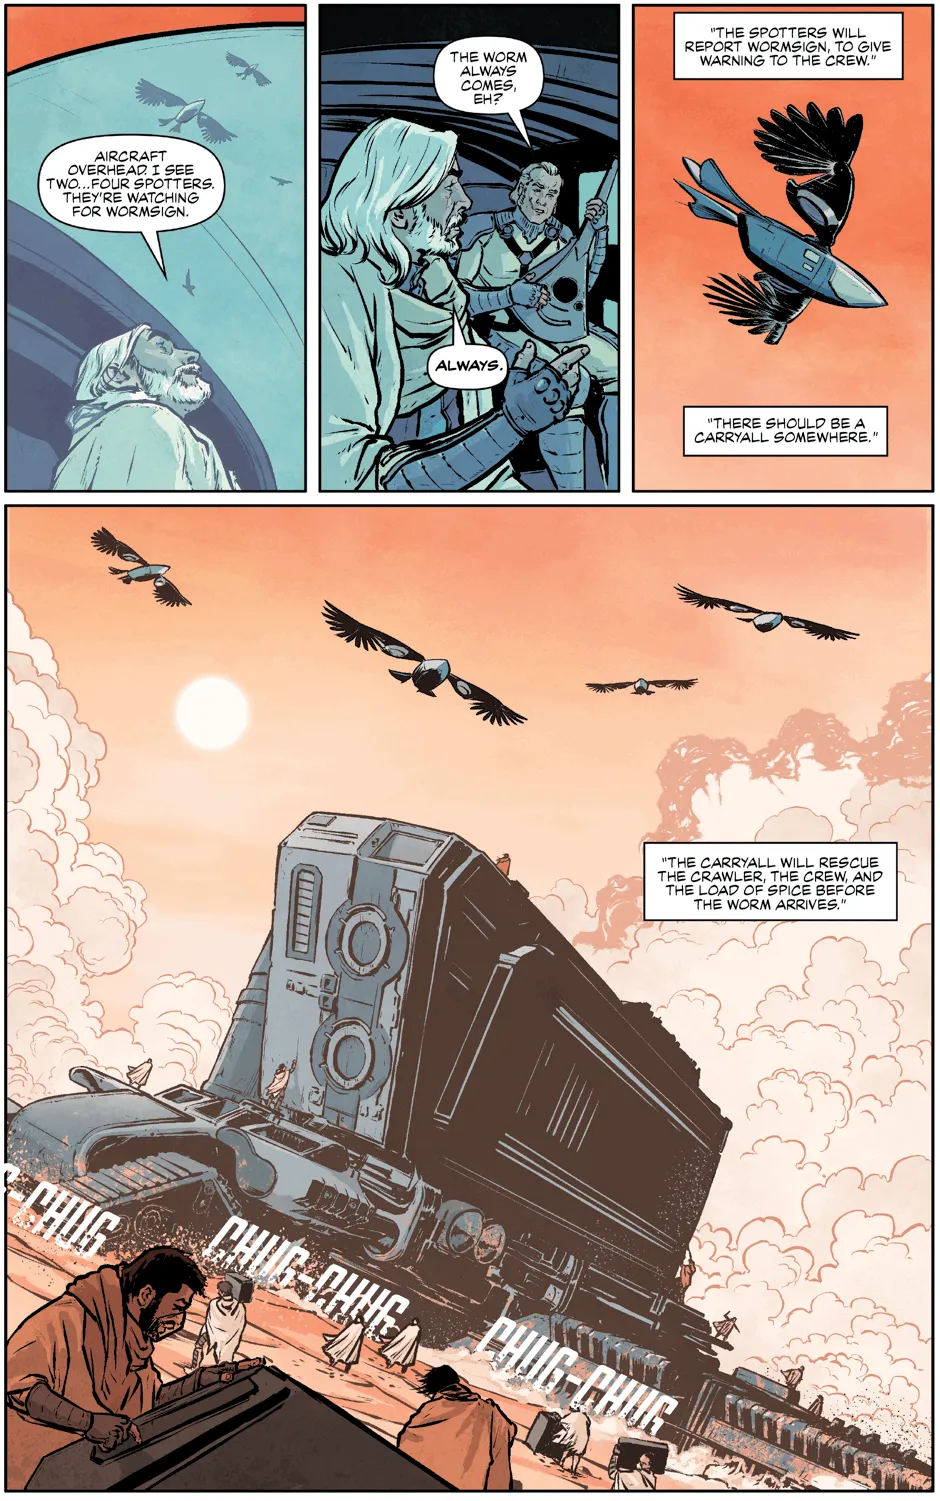 Page 78 of Dune: The Graphic Novel, adapted by Brian Herbert and Kevin J. Anderson, illustrated by Raúl Allen and Patricia Martín, published by Abrams ComicArts © 2020 Herbert Properties LLC